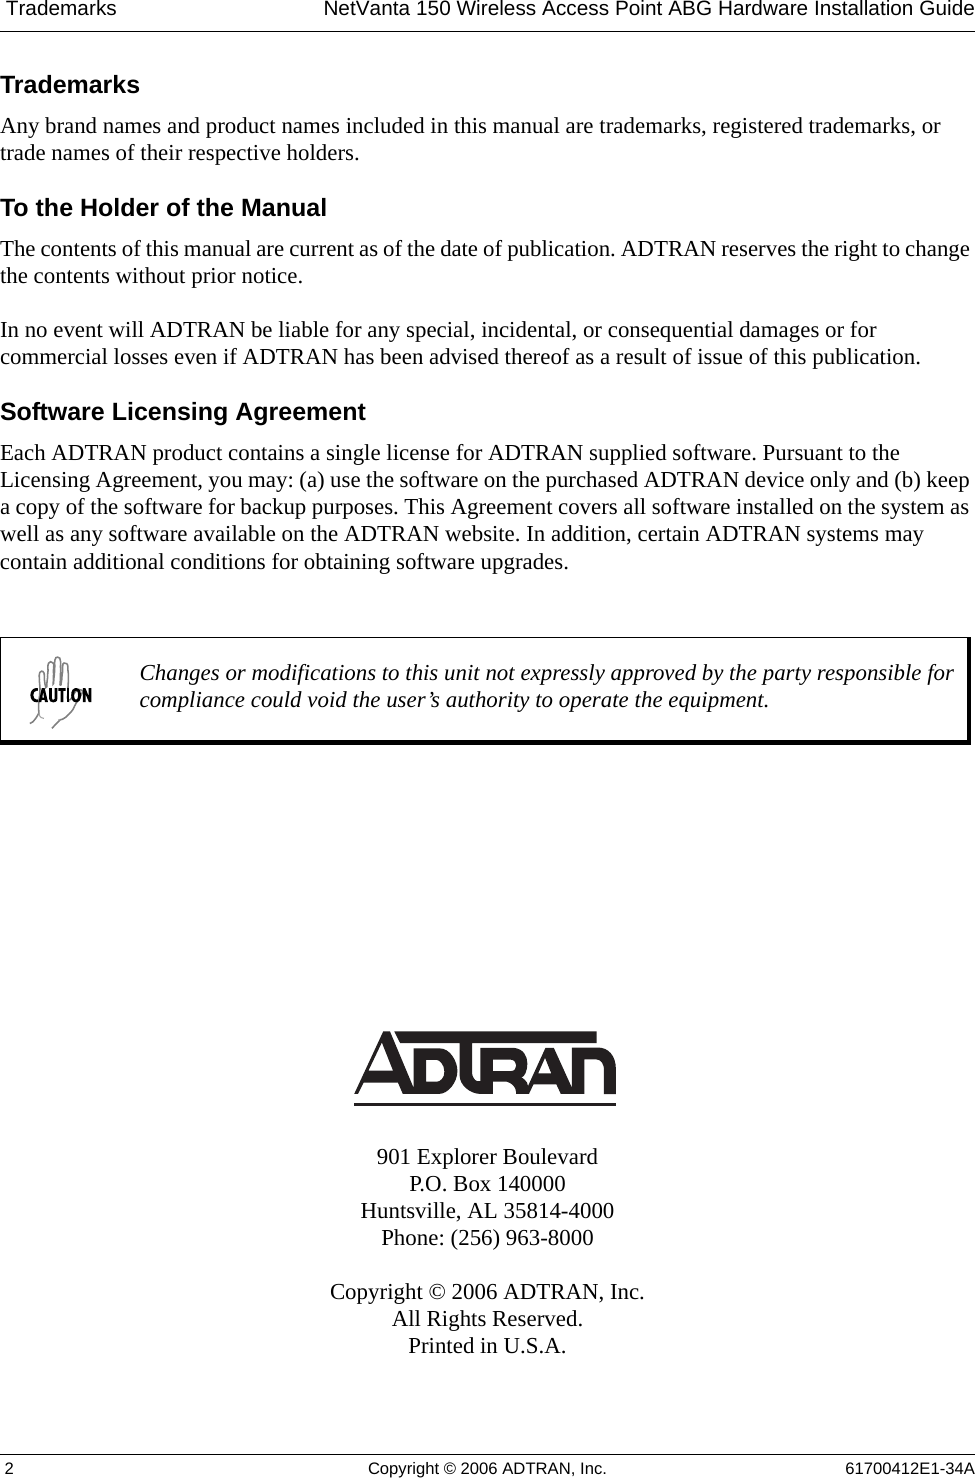  Trademarks NetVanta 150 Wireless Access Point ABG Hardware Installation Guide 2 Copyright © 2006 ADTRAN, Inc. 61700412E1-34ATrademarksAny brand names and product names included in this manual are trademarks, registered trademarks, or trade names of their respective holders.To the Holder of the ManualThe contents of this manual are current as of the date of publication. ADTRAN reserves the right to change the contents without prior notice.In no event will ADTRAN be liable for any special, incidental, or consequential damages or for commercial losses even if ADTRAN has been advised thereof as a result of issue of this publication. Software Licensing AgreementEach ADTRAN product contains a single license for ADTRAN supplied software. Pursuant to the Licensing Agreement, you may: (a) use the software on the purchased ADTRAN device only and (b) keep a copy of the software for backup purposes. This Agreement covers all software installed on the system as well as any software available on the ADTRAN website. In addition, certain ADTRAN systems may contain additional conditions for obtaining software upgrades. 901 Explorer BoulevardP.O. Box 140000Huntsville, AL 35814-4000Phone: (256) 963-8000Copyright © 2006 ADTRAN, Inc.All Rights Reserved.Printed in U.S.A.Changes or modifications to this unit not expressly approved by the party responsible for compliance could void the user’s authority to operate the equipment.